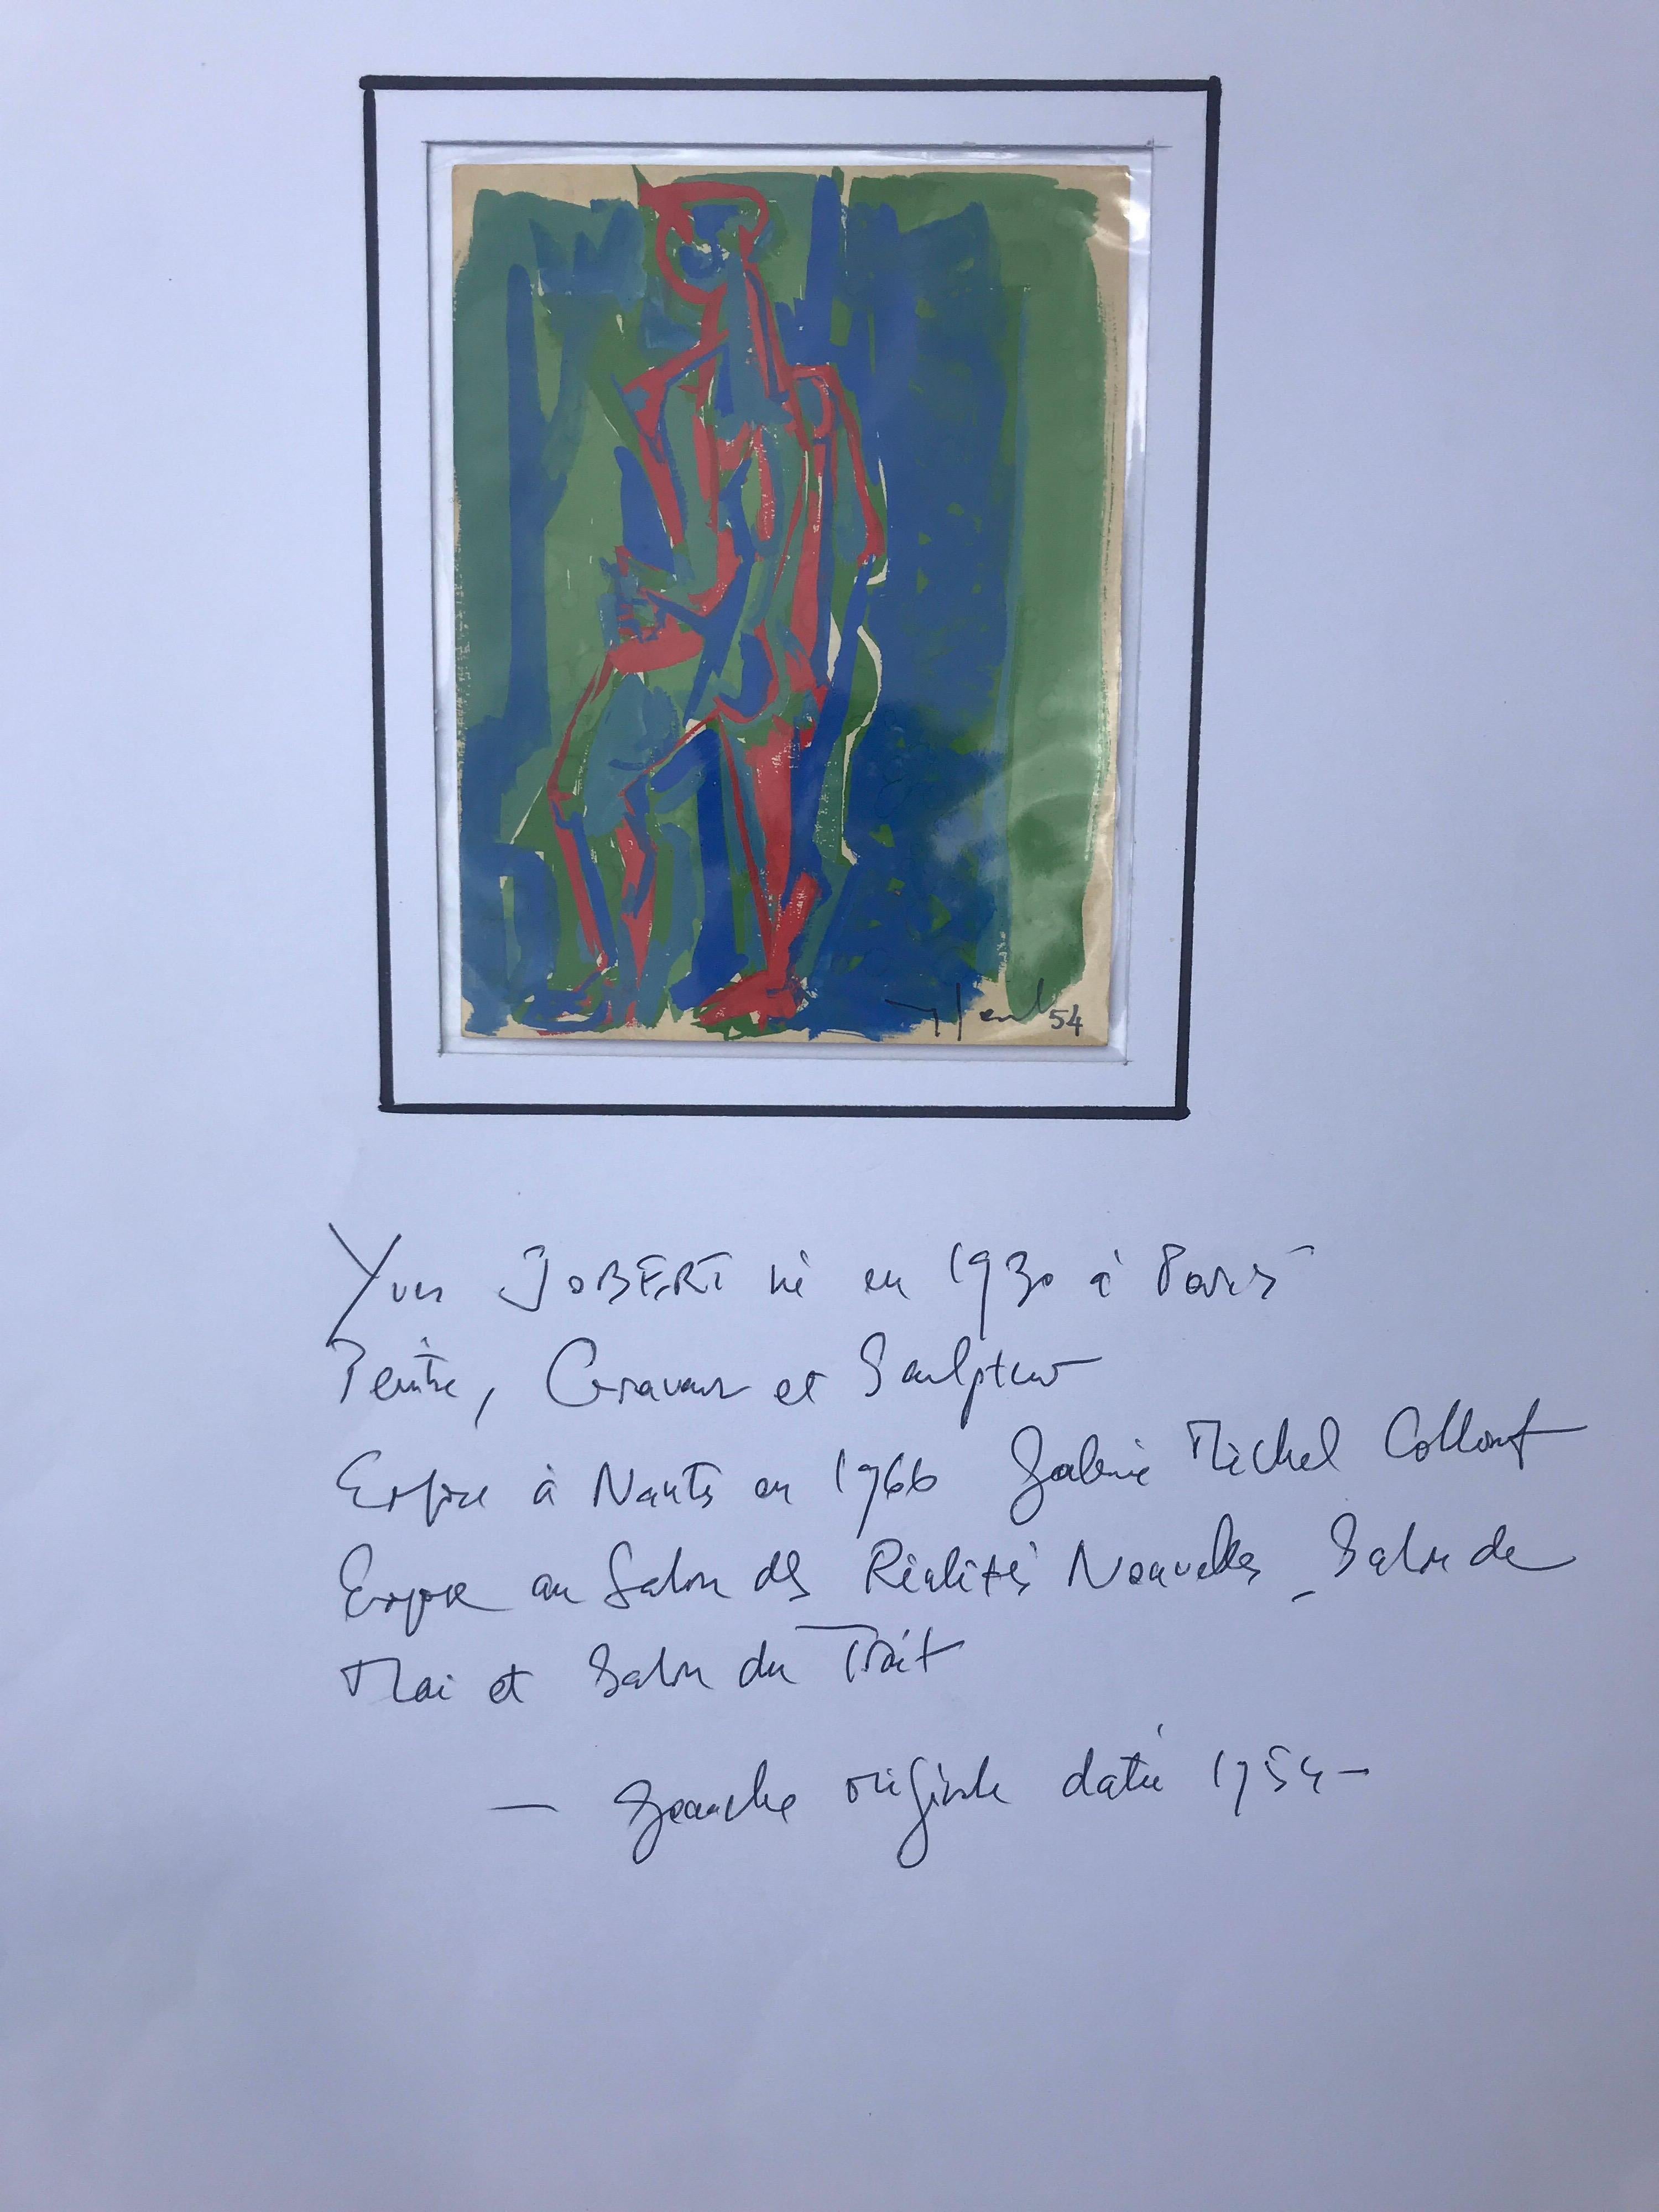 Green and Blue, Yves Jobert Original 1954 Vintage Gouache on Paper Drawing 1